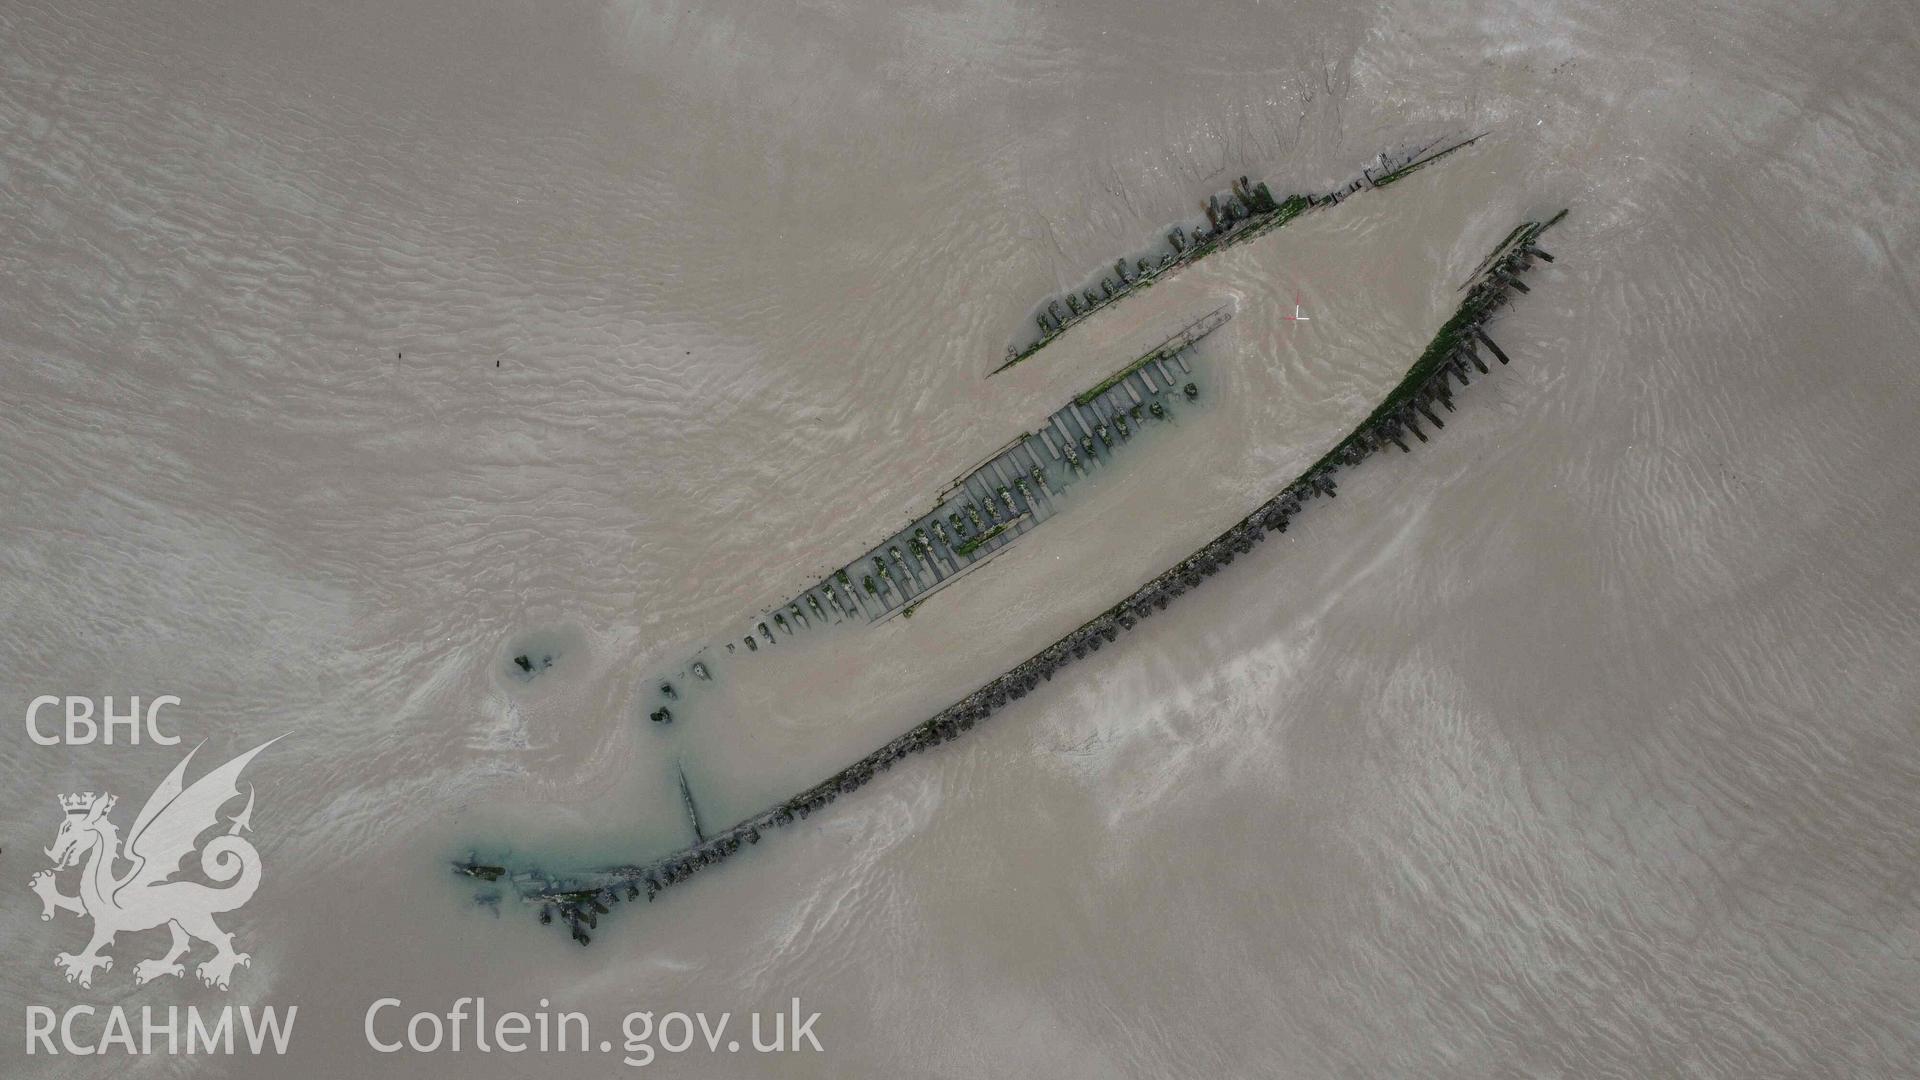 Cefn Sidan wreck 1. Overhead view taken on 21/02/2023. North is to the top, Scales are 1m. The bow of the ship is to the top-right of the image.